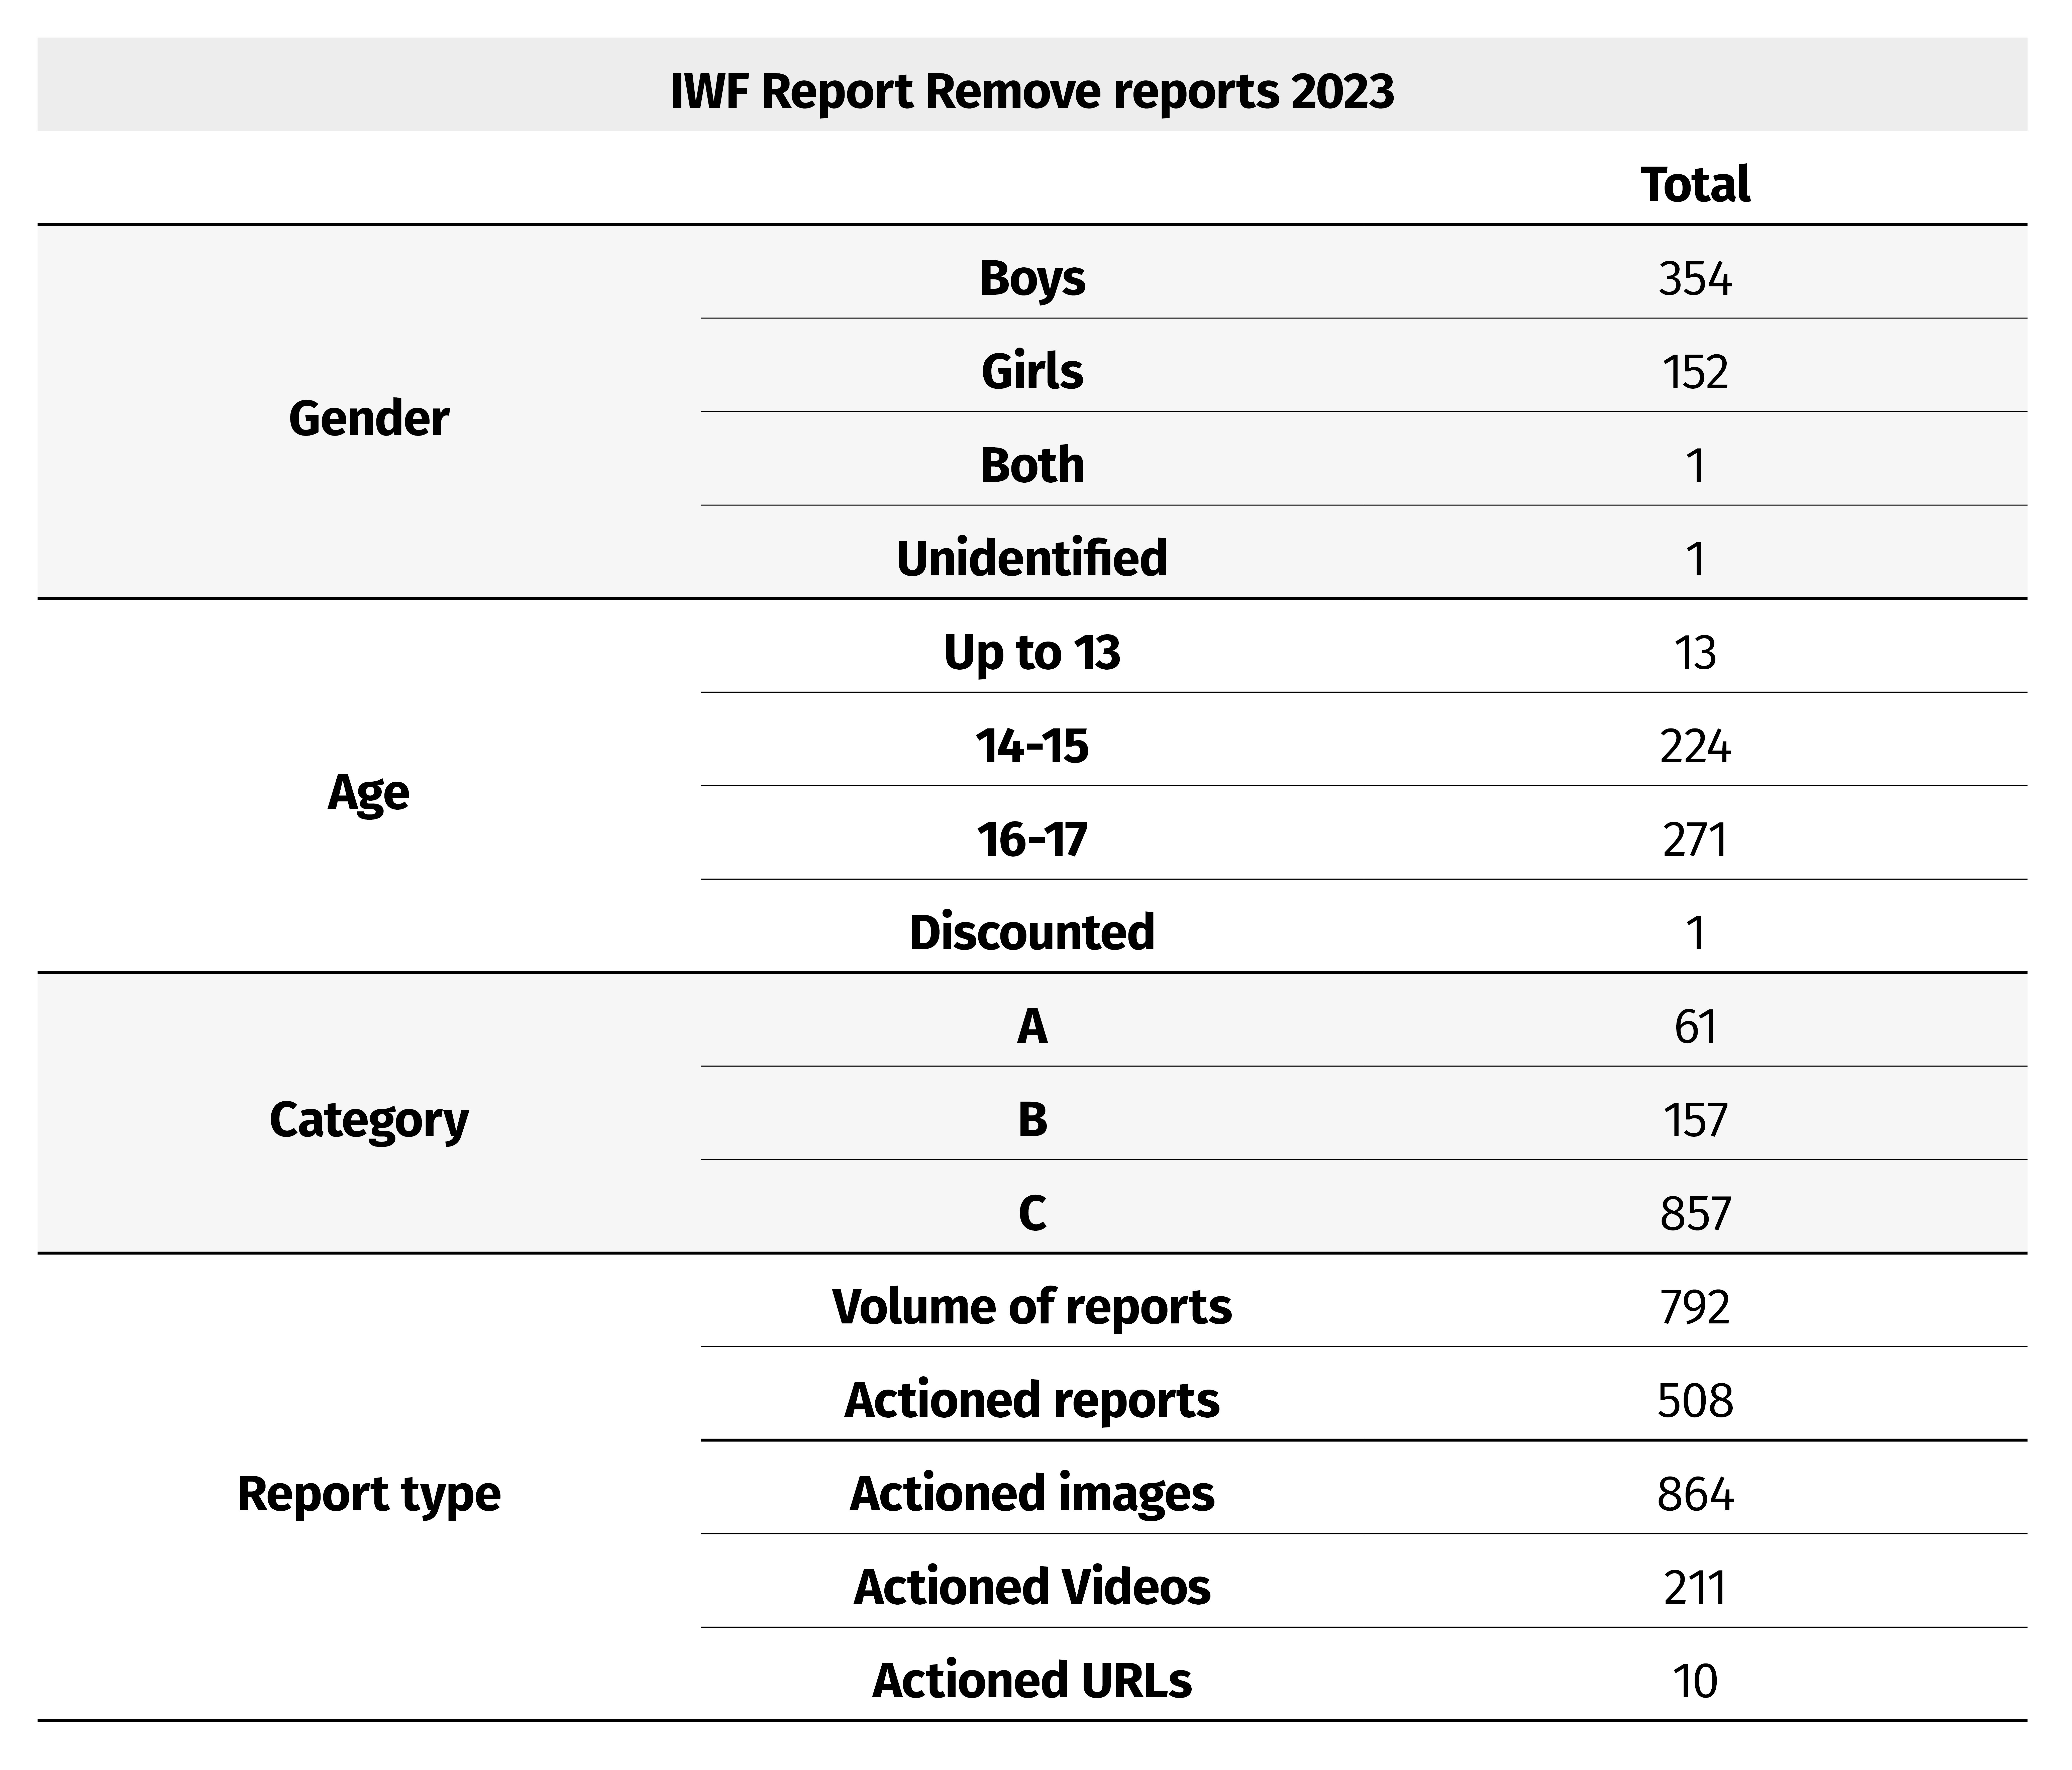 Table 3: Breakdown of ALL actioned IWF child sexual abuse reports received via Report Remove tool in 2023. Not all of these reports were cases of sexual extortion.